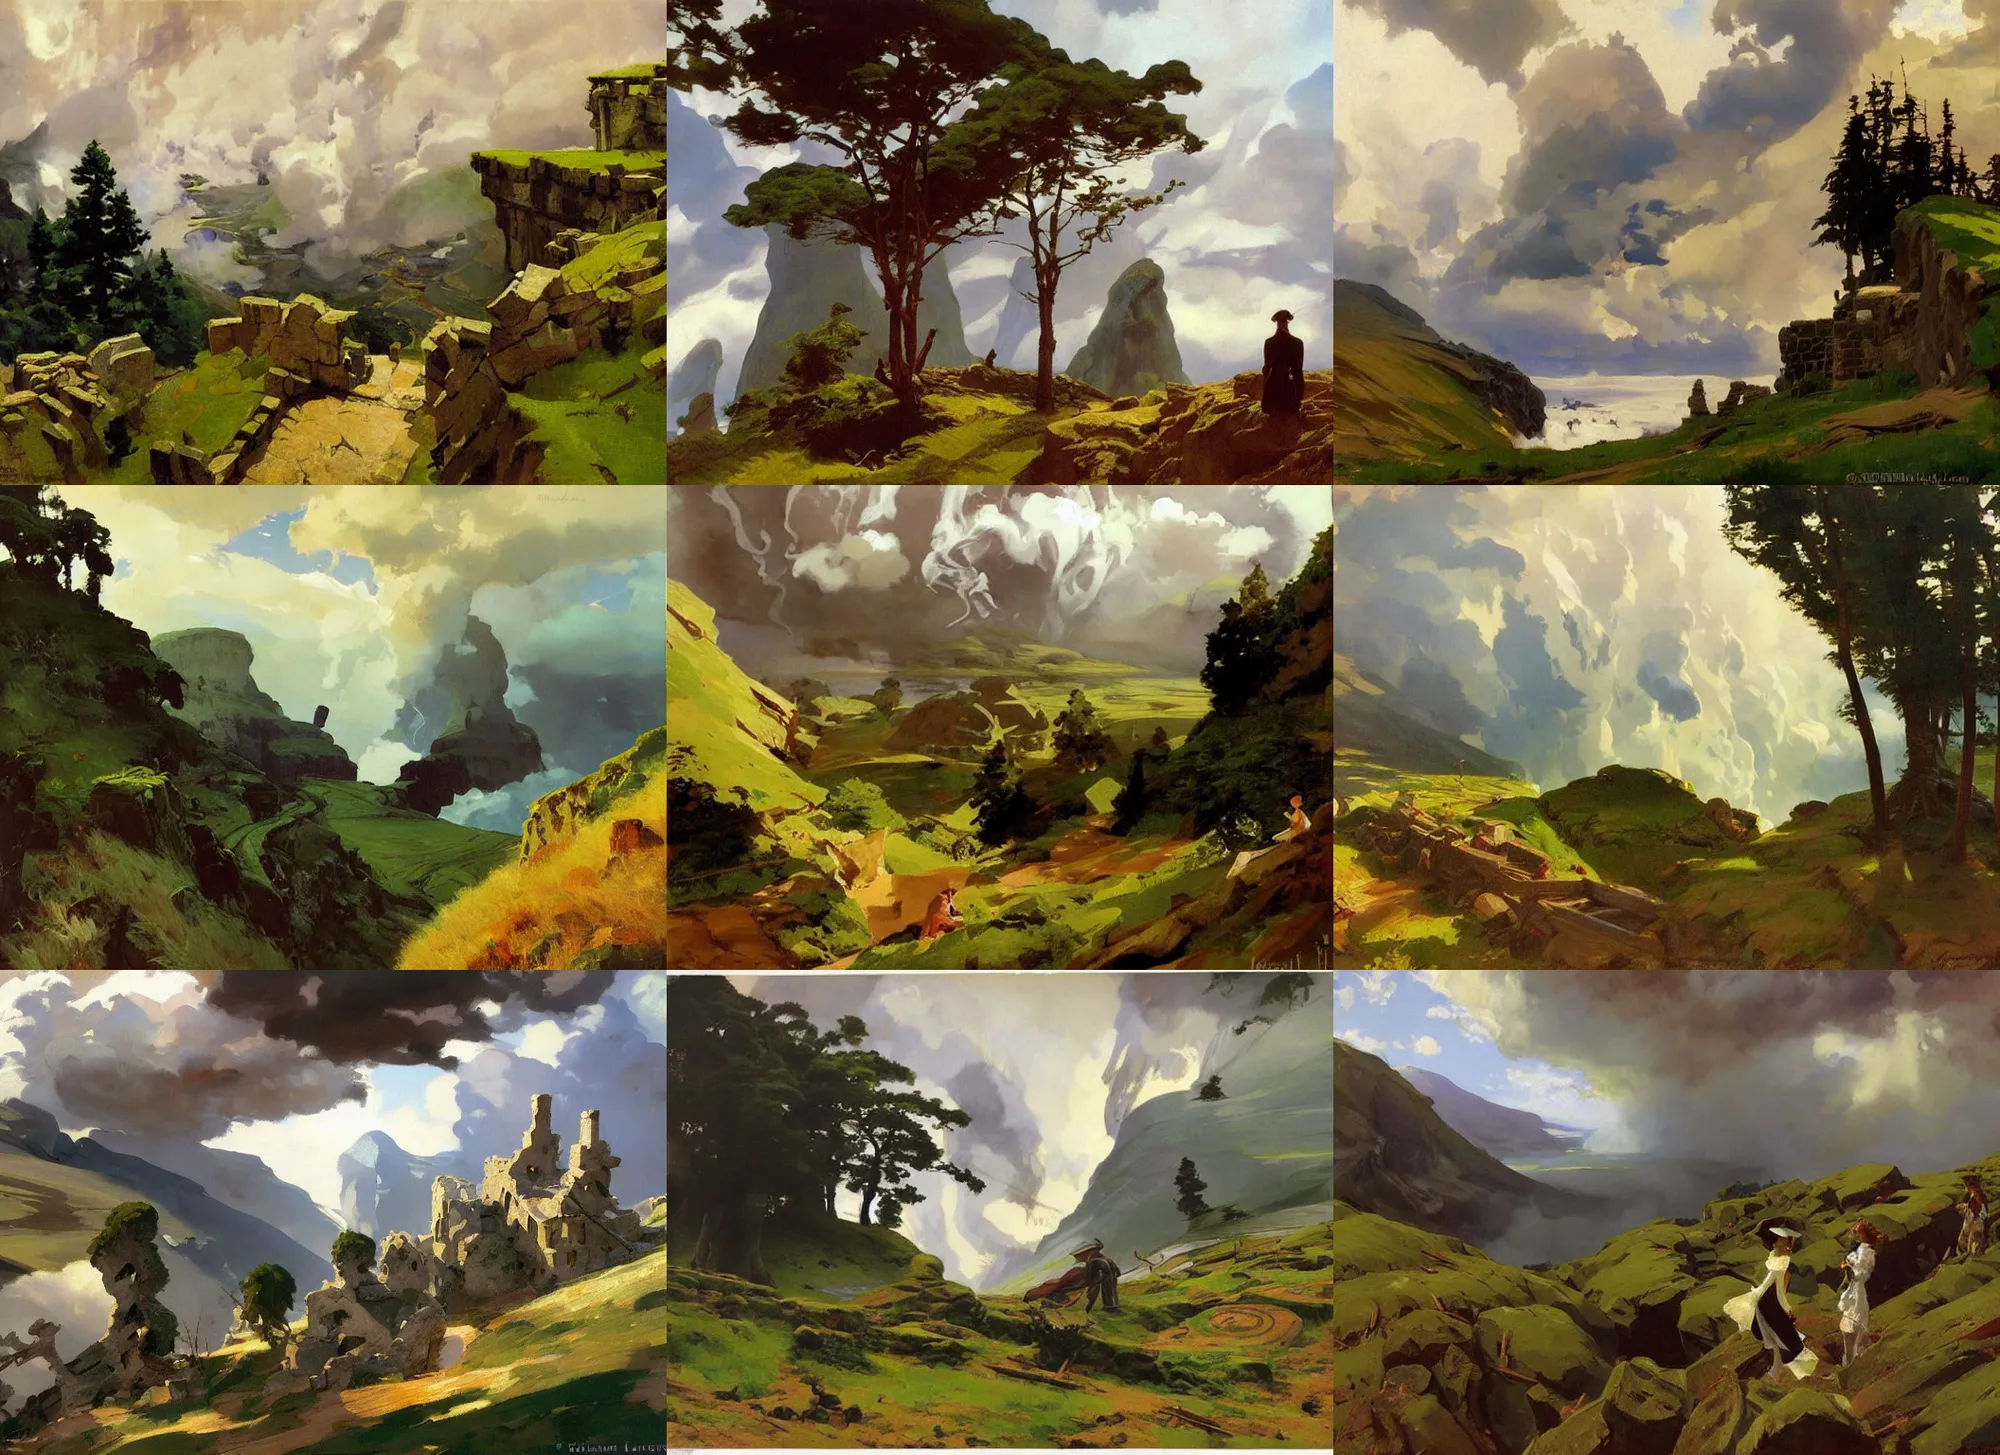 Prompt: painting by sargent and leyendecker and greg hildebrandt savrasov levitan polenov, studio ghibly style mononoke, huge old ruins, middle earth above the layered low clouds road between forests trees sea bay view faroe azores overcast storm masterpiece